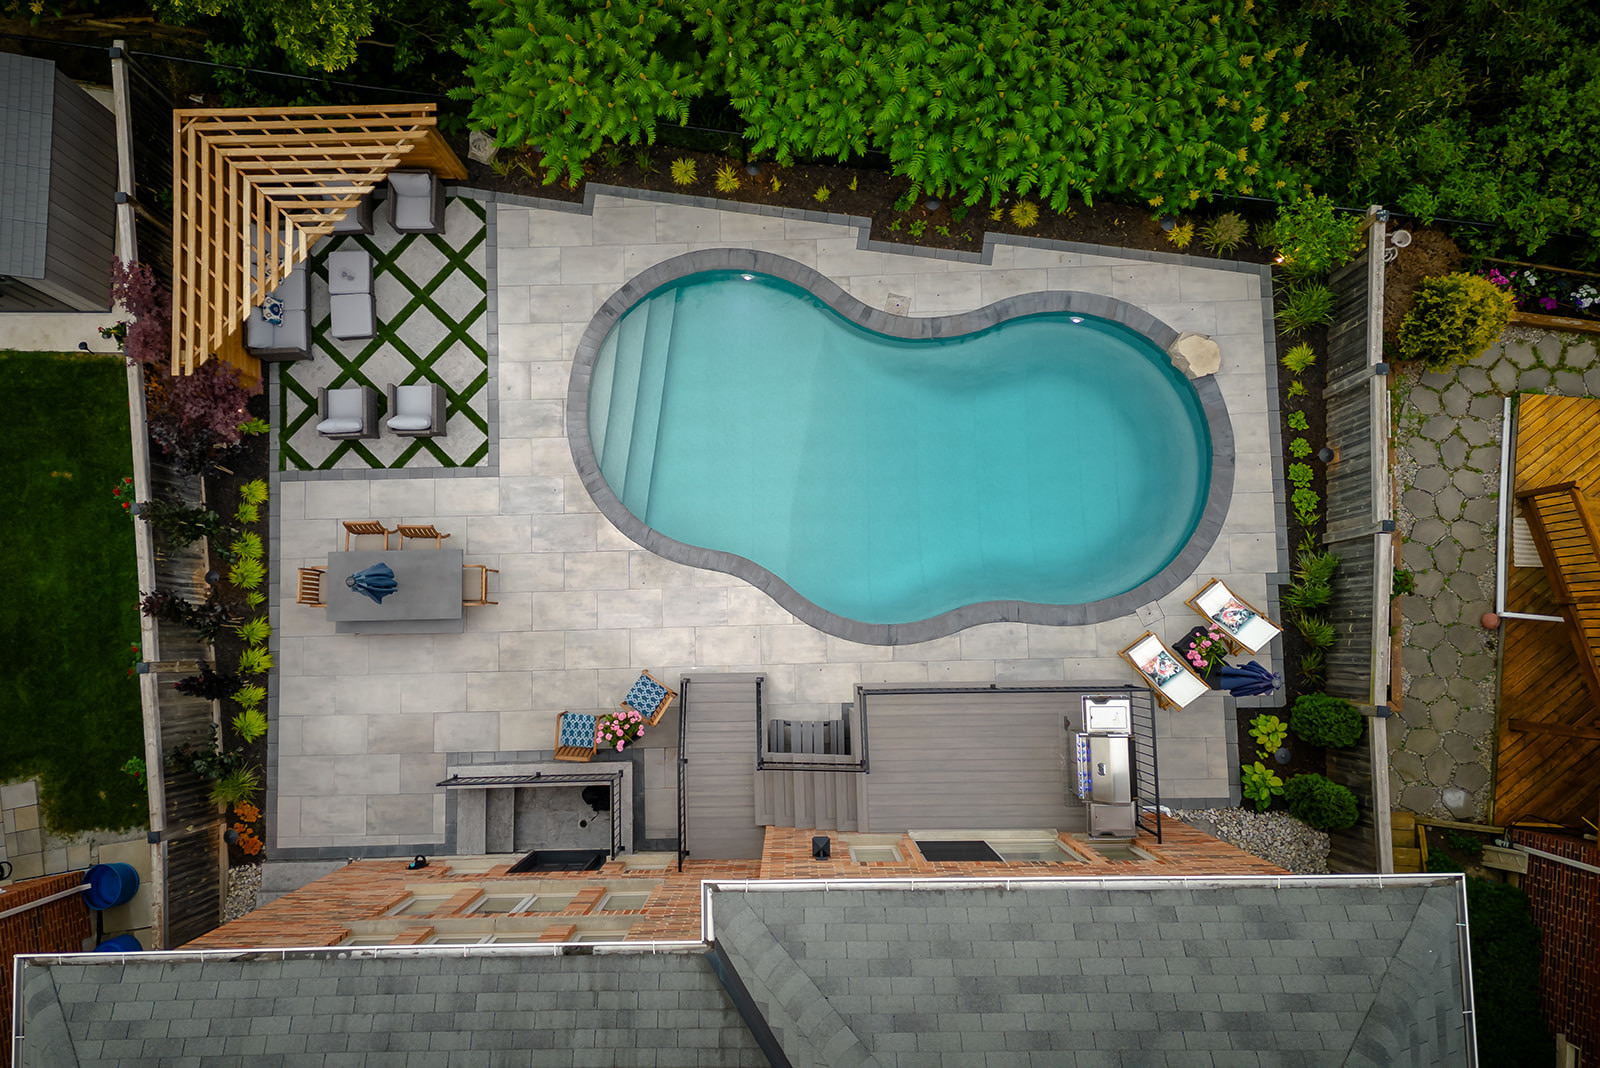 Top-down view of an inground pool, outdoor patio set surrounded by interlocking blocks.